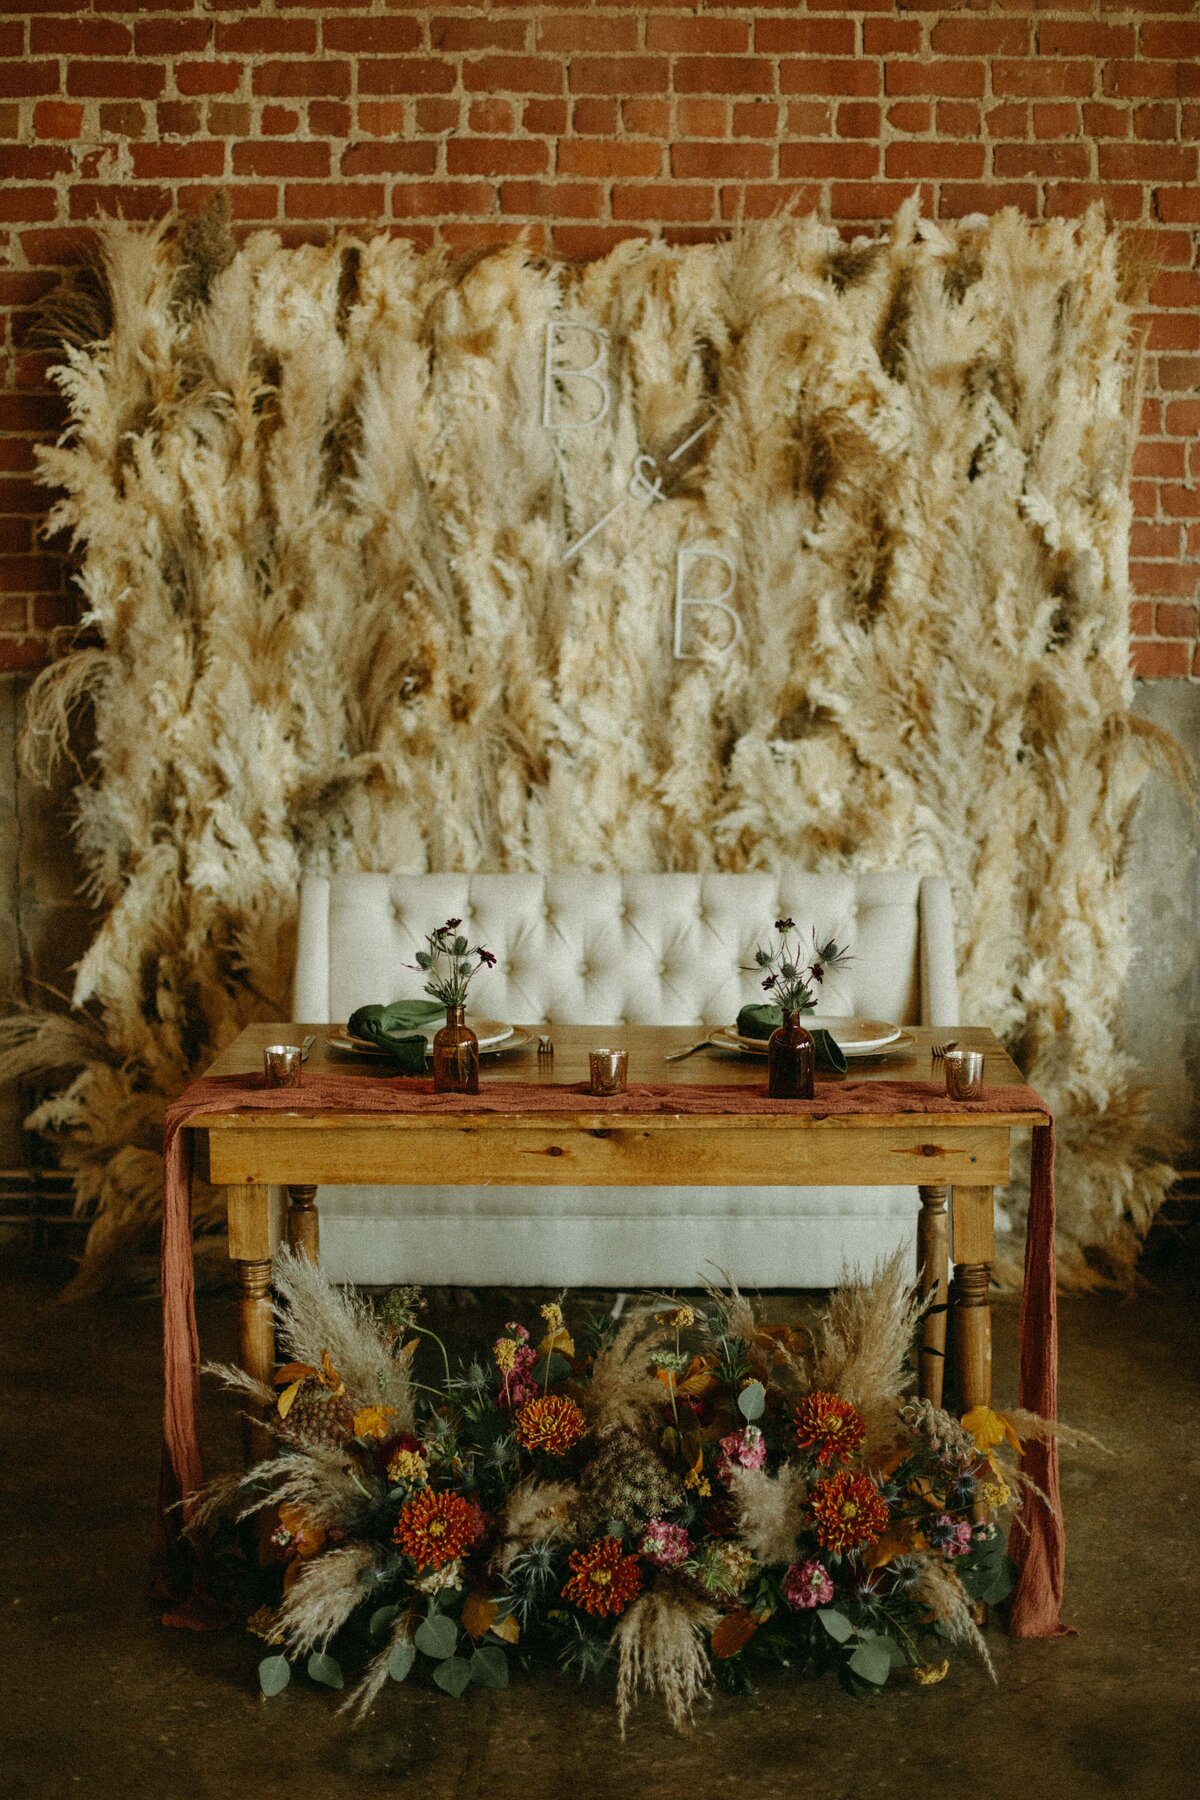 A rustic wedding reception setup at an Iowa farm featuring a wooden table with floral arrangements in front, a tufted bench, and a backdrop of feather boas with monogram initials.